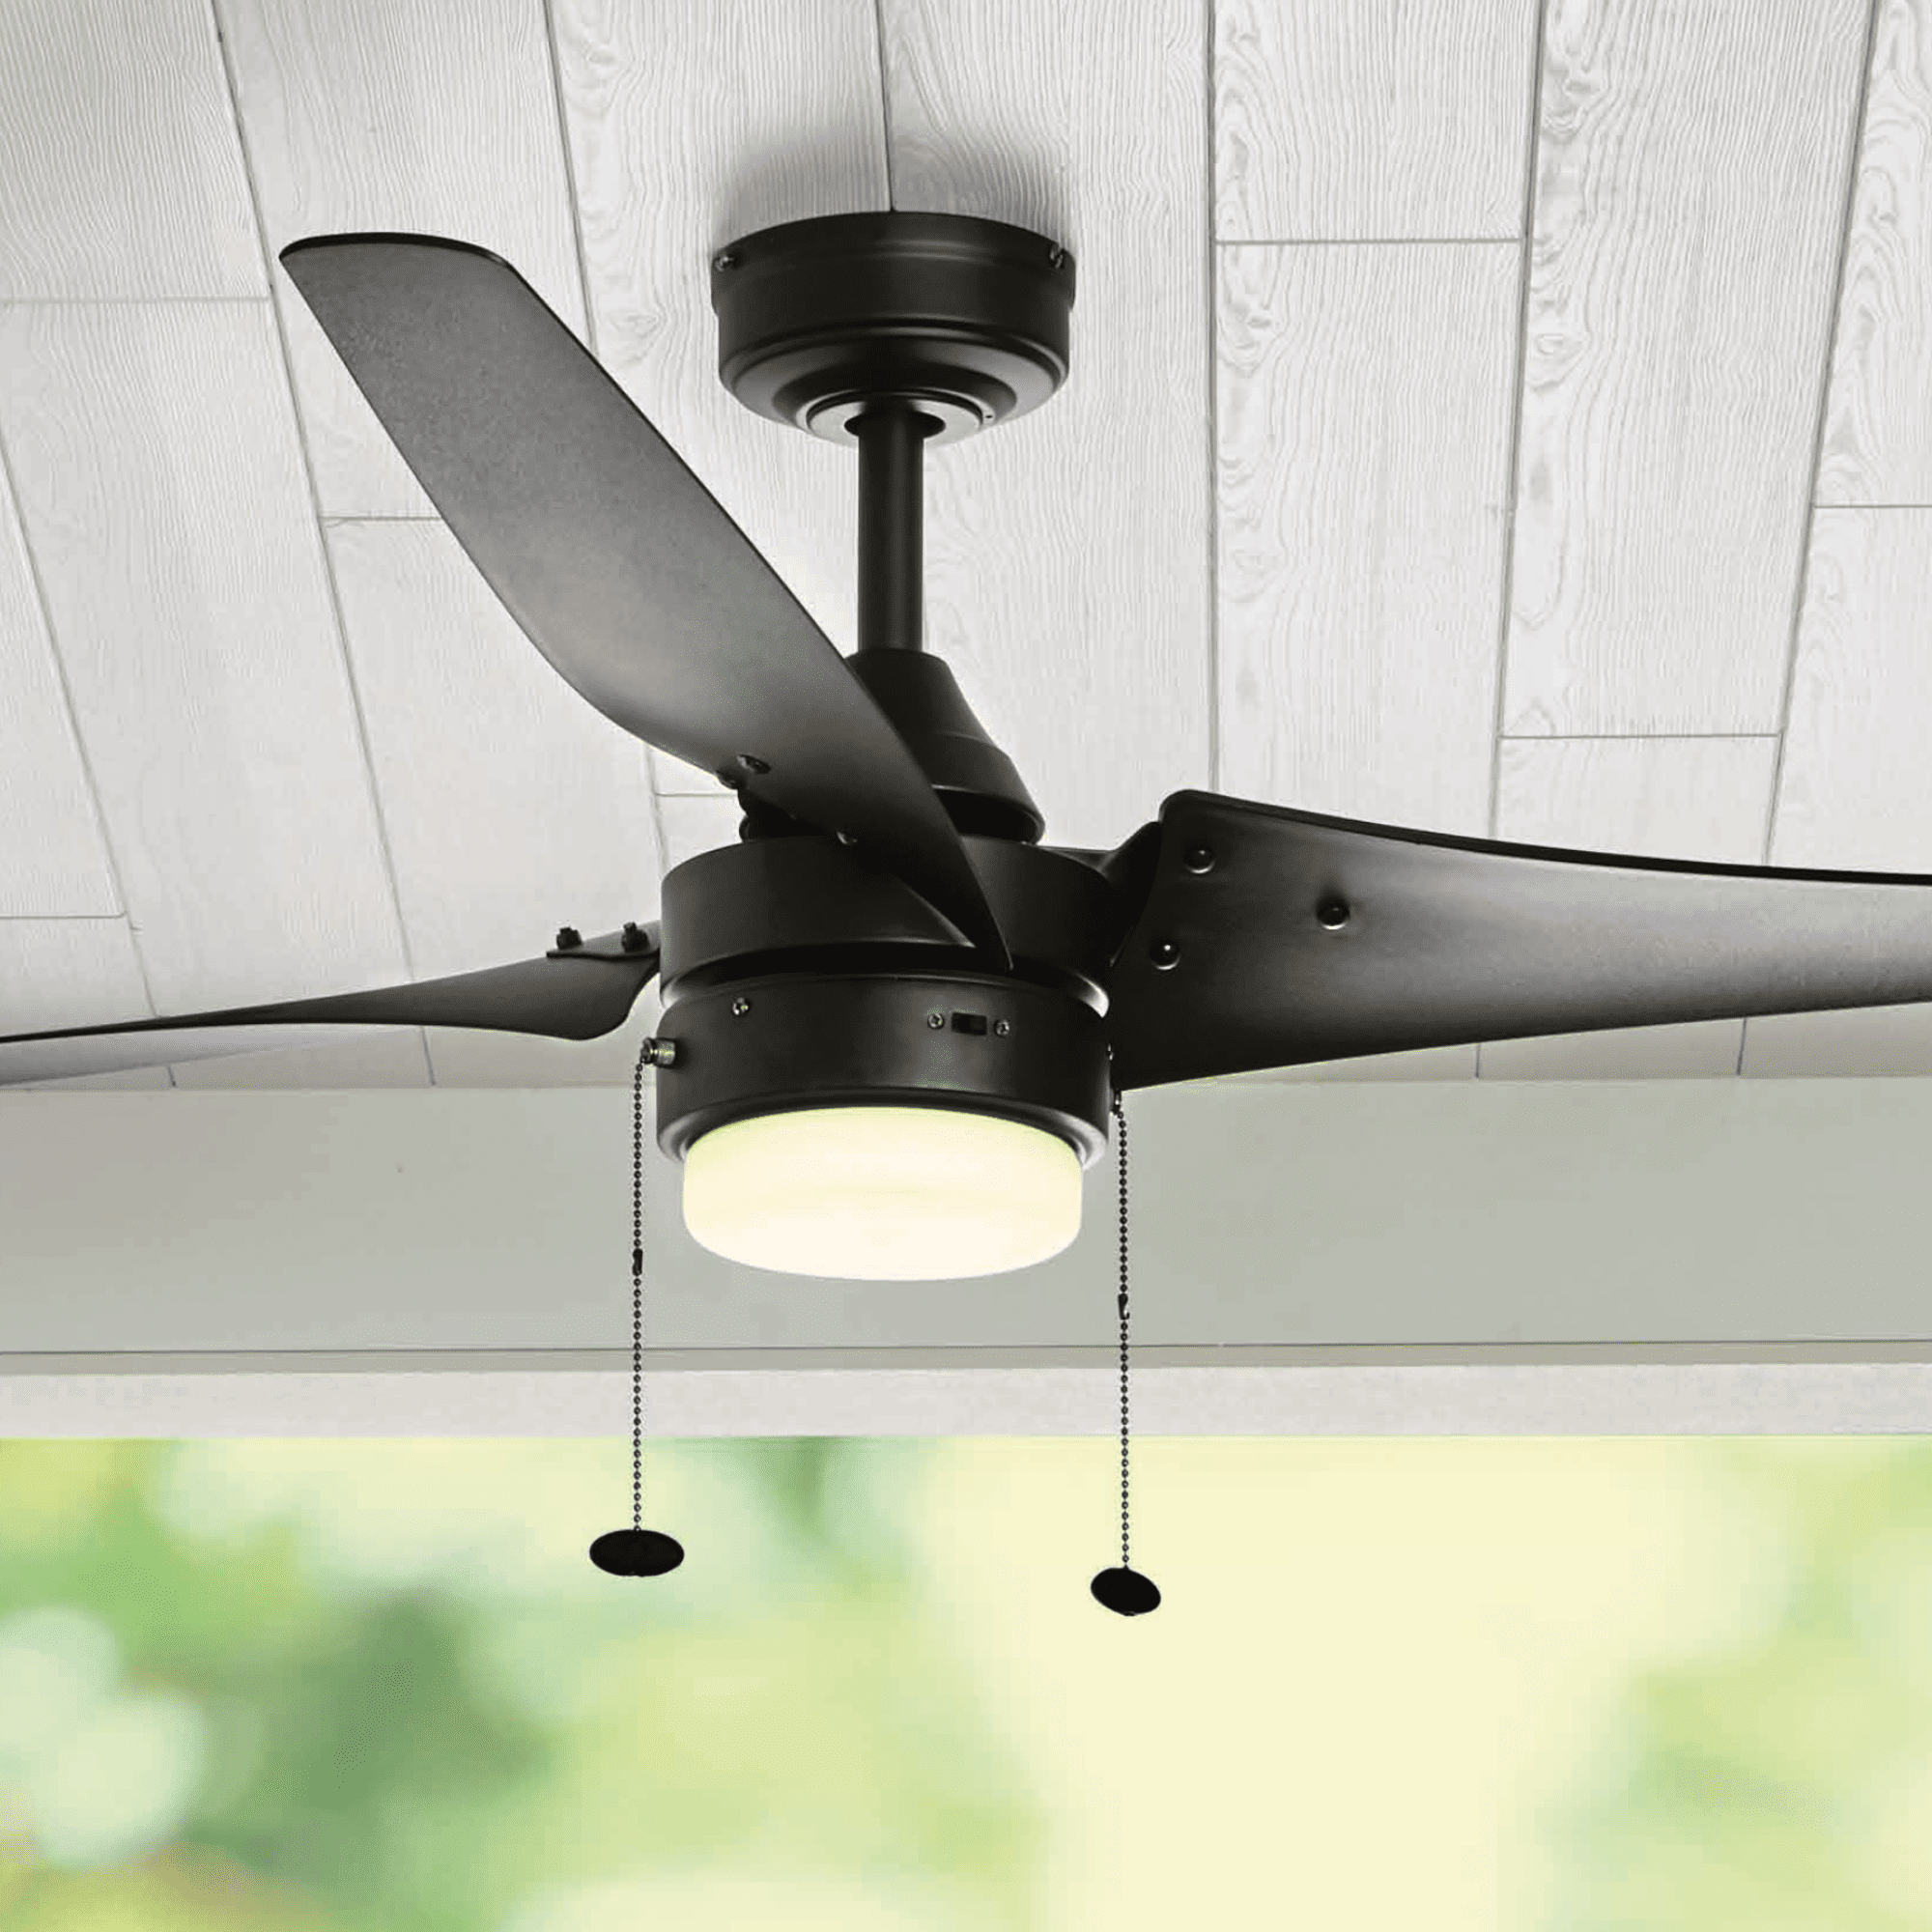 Better Homes and Gardens 56” Black Indoor/Outdoor Ceiling Fan with 3 Blades， Light Kit， Pull Chains and Reverse Airflow